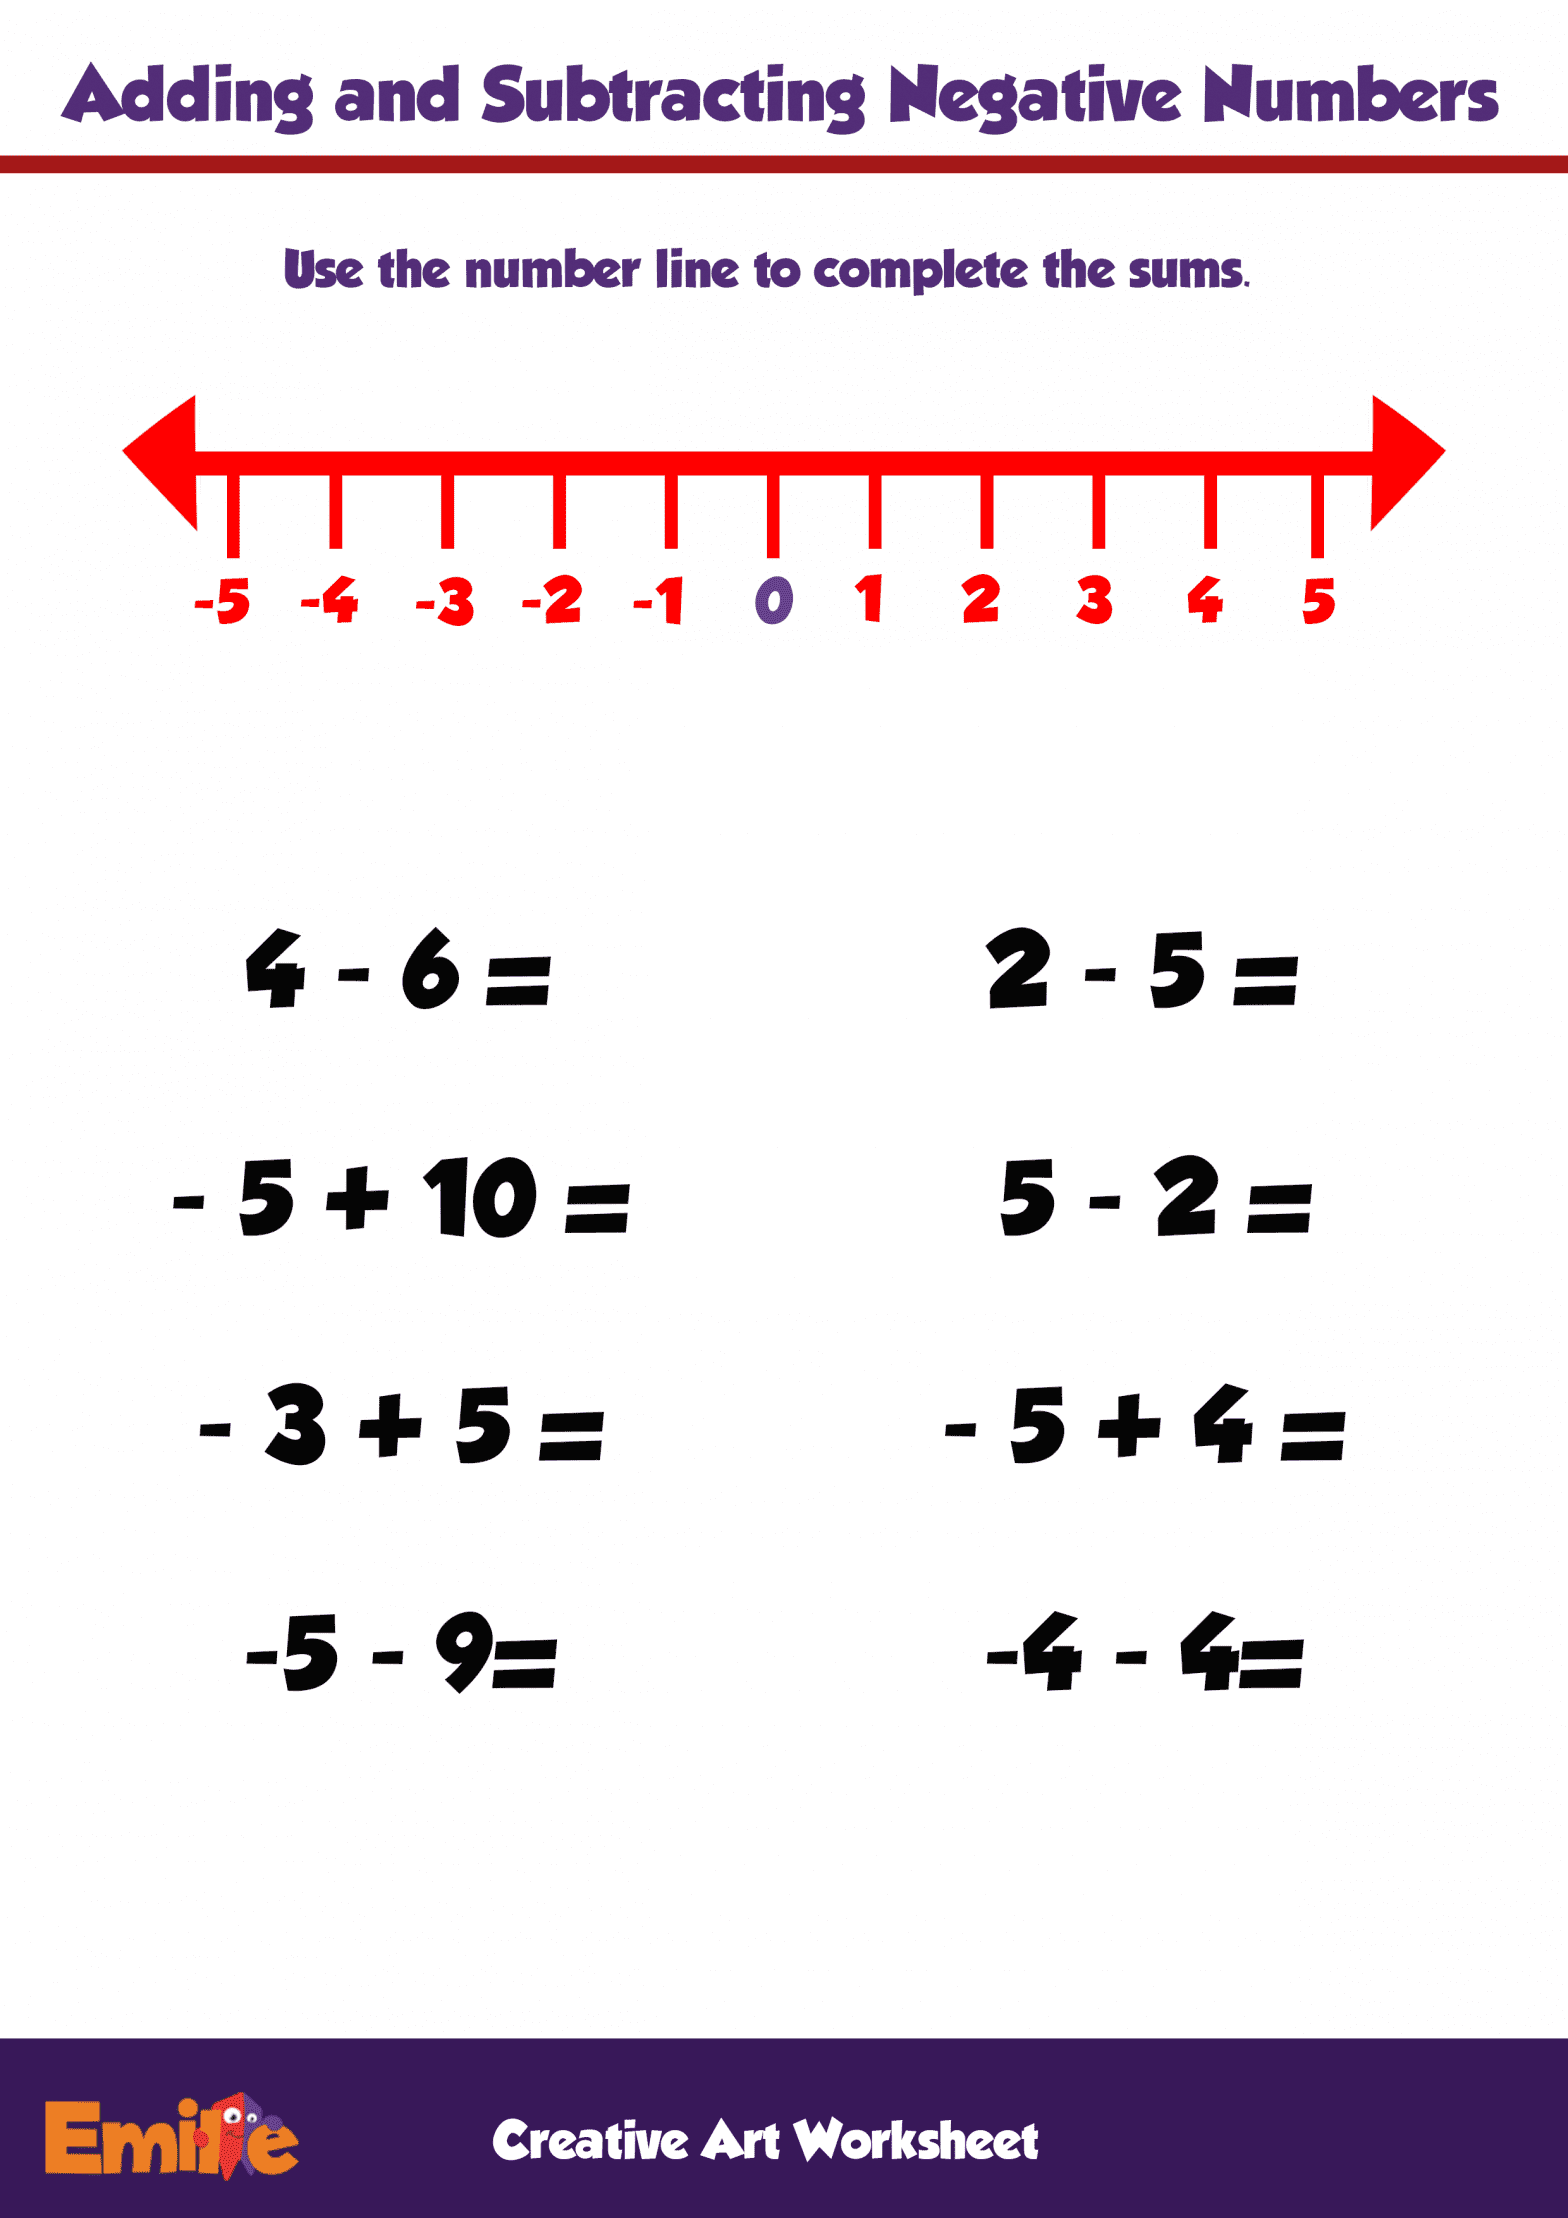 Working With Positive And Negative Numbers Worksheets